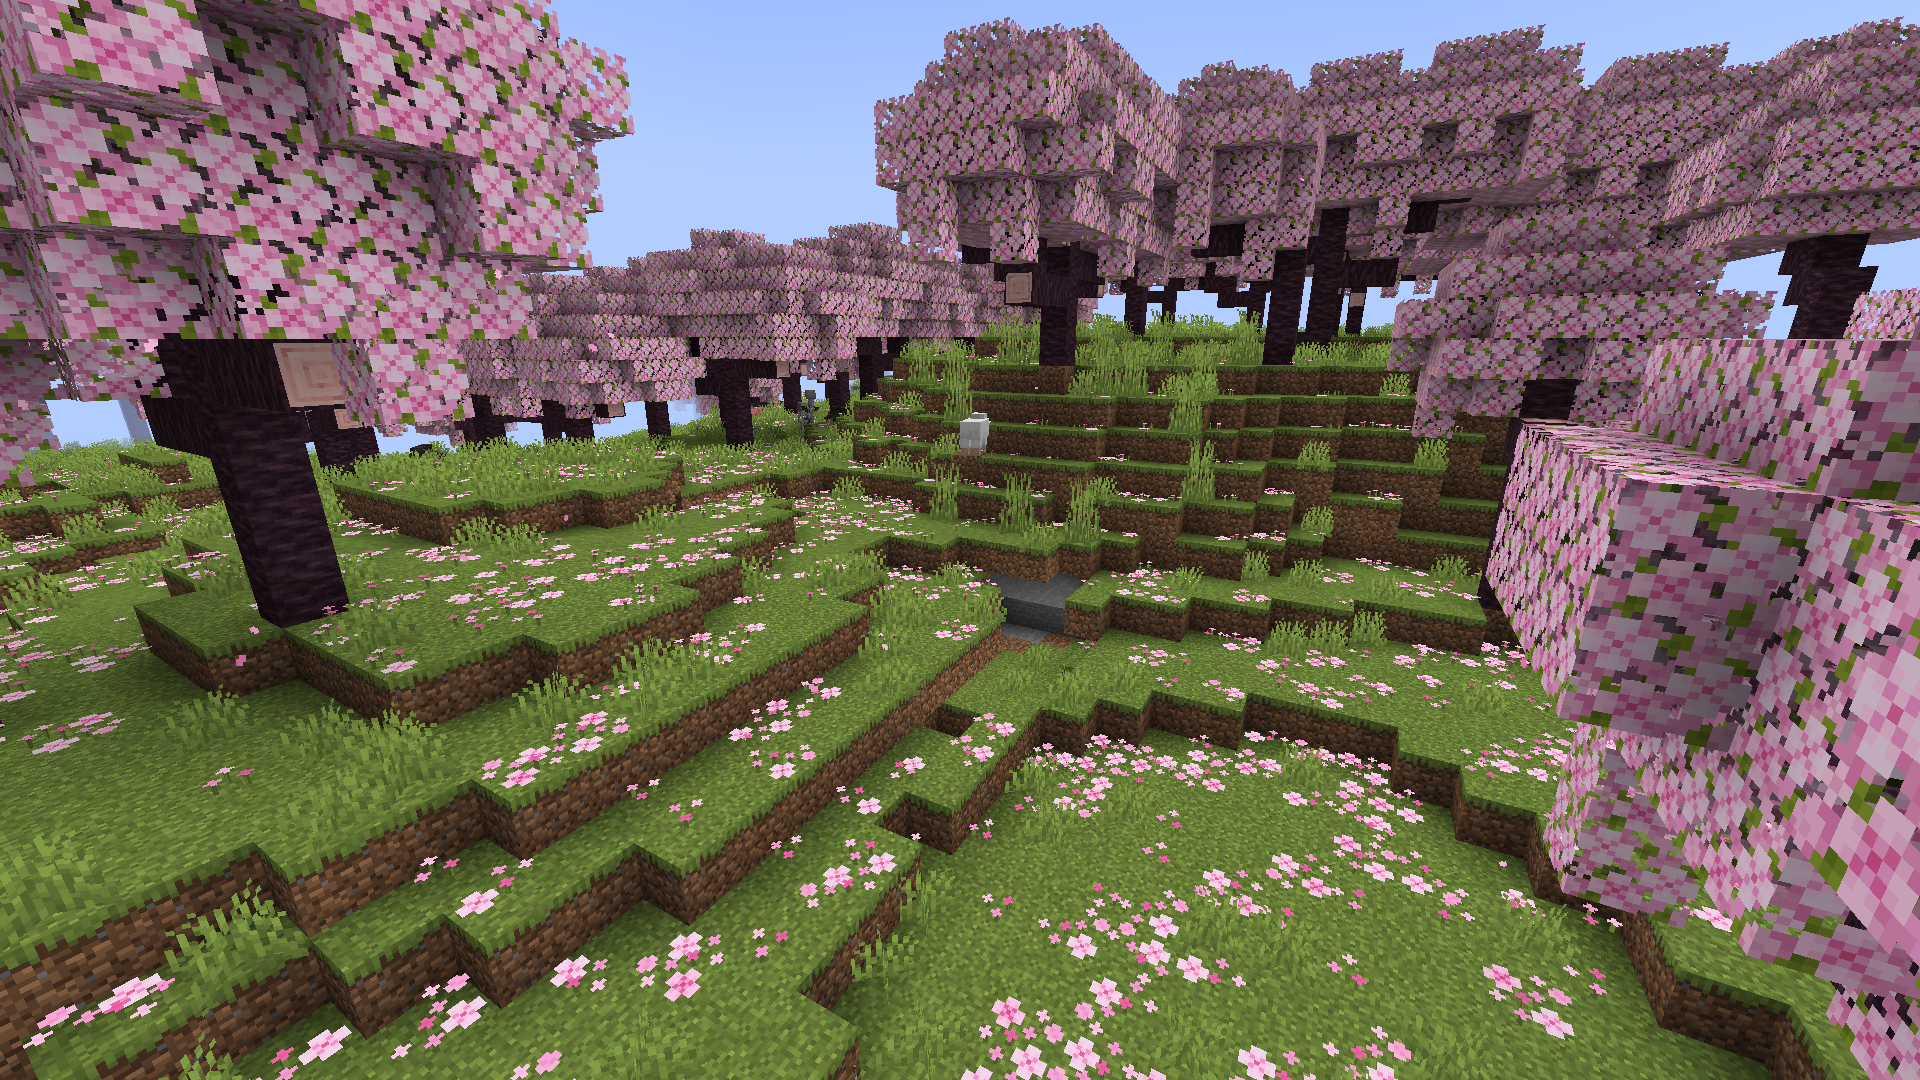 Minecraft 1.20 adding Archaeology, Cherry Blossom Biome and a Sniffer mob